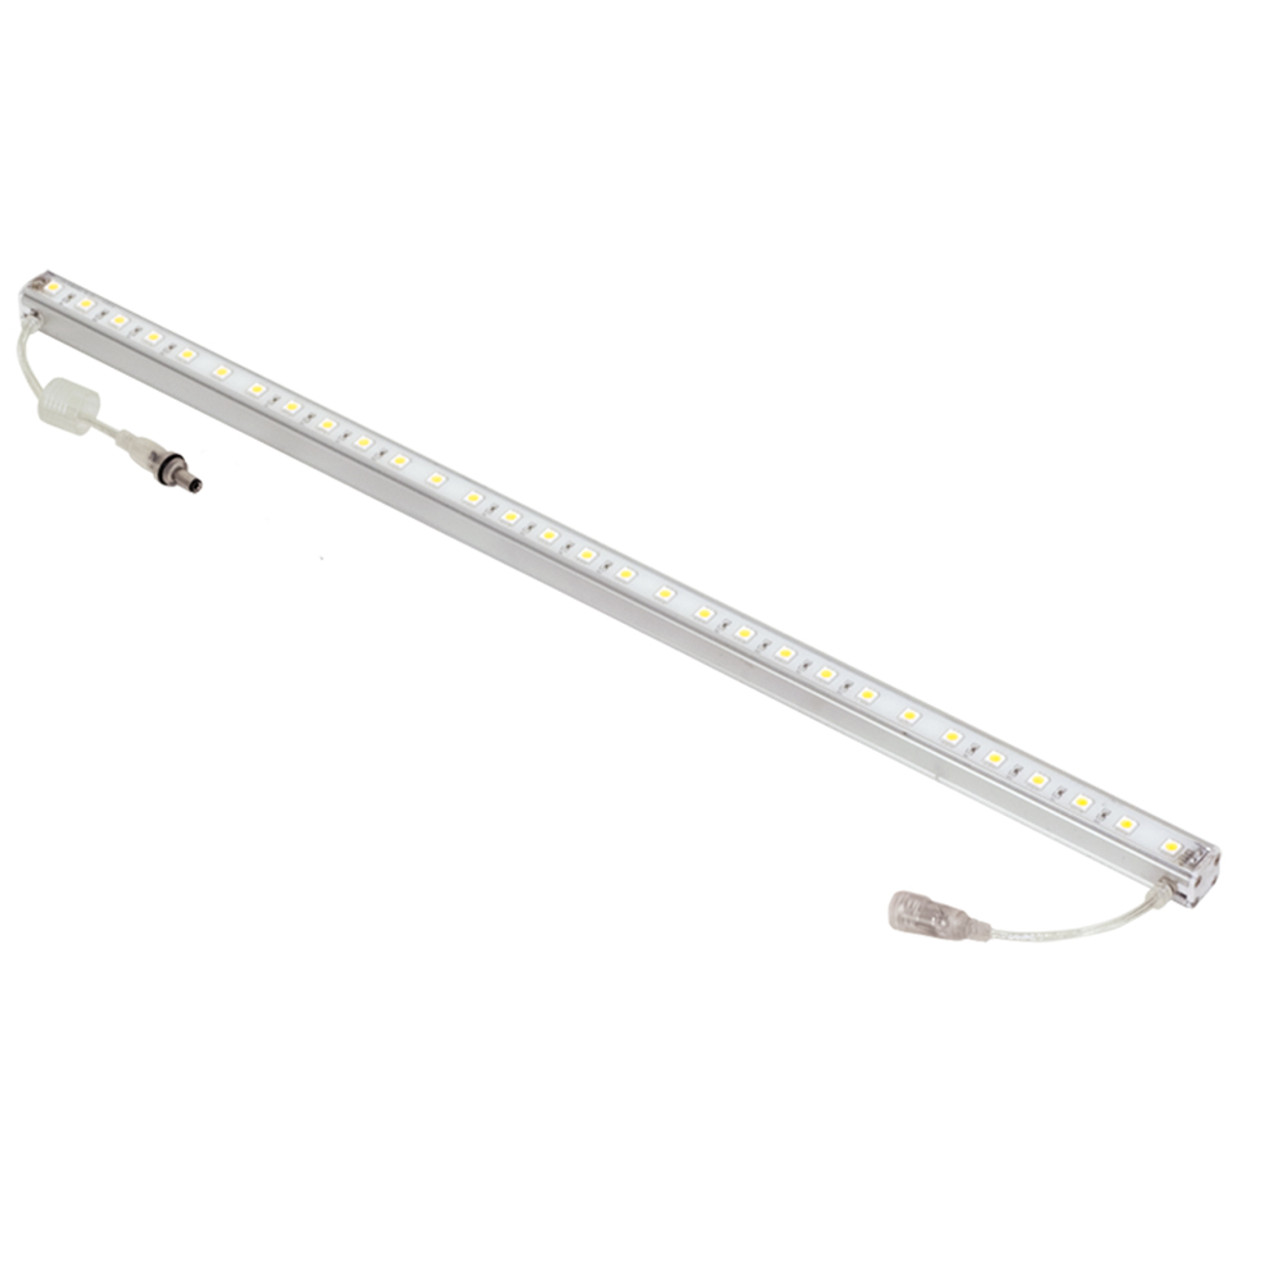 JESCO Lighting DL-RS-48-60 12.8W Dimmable linear LED fixture for wet,damp and dry locations. Aluminium extruded housing. , 6200K-6400K